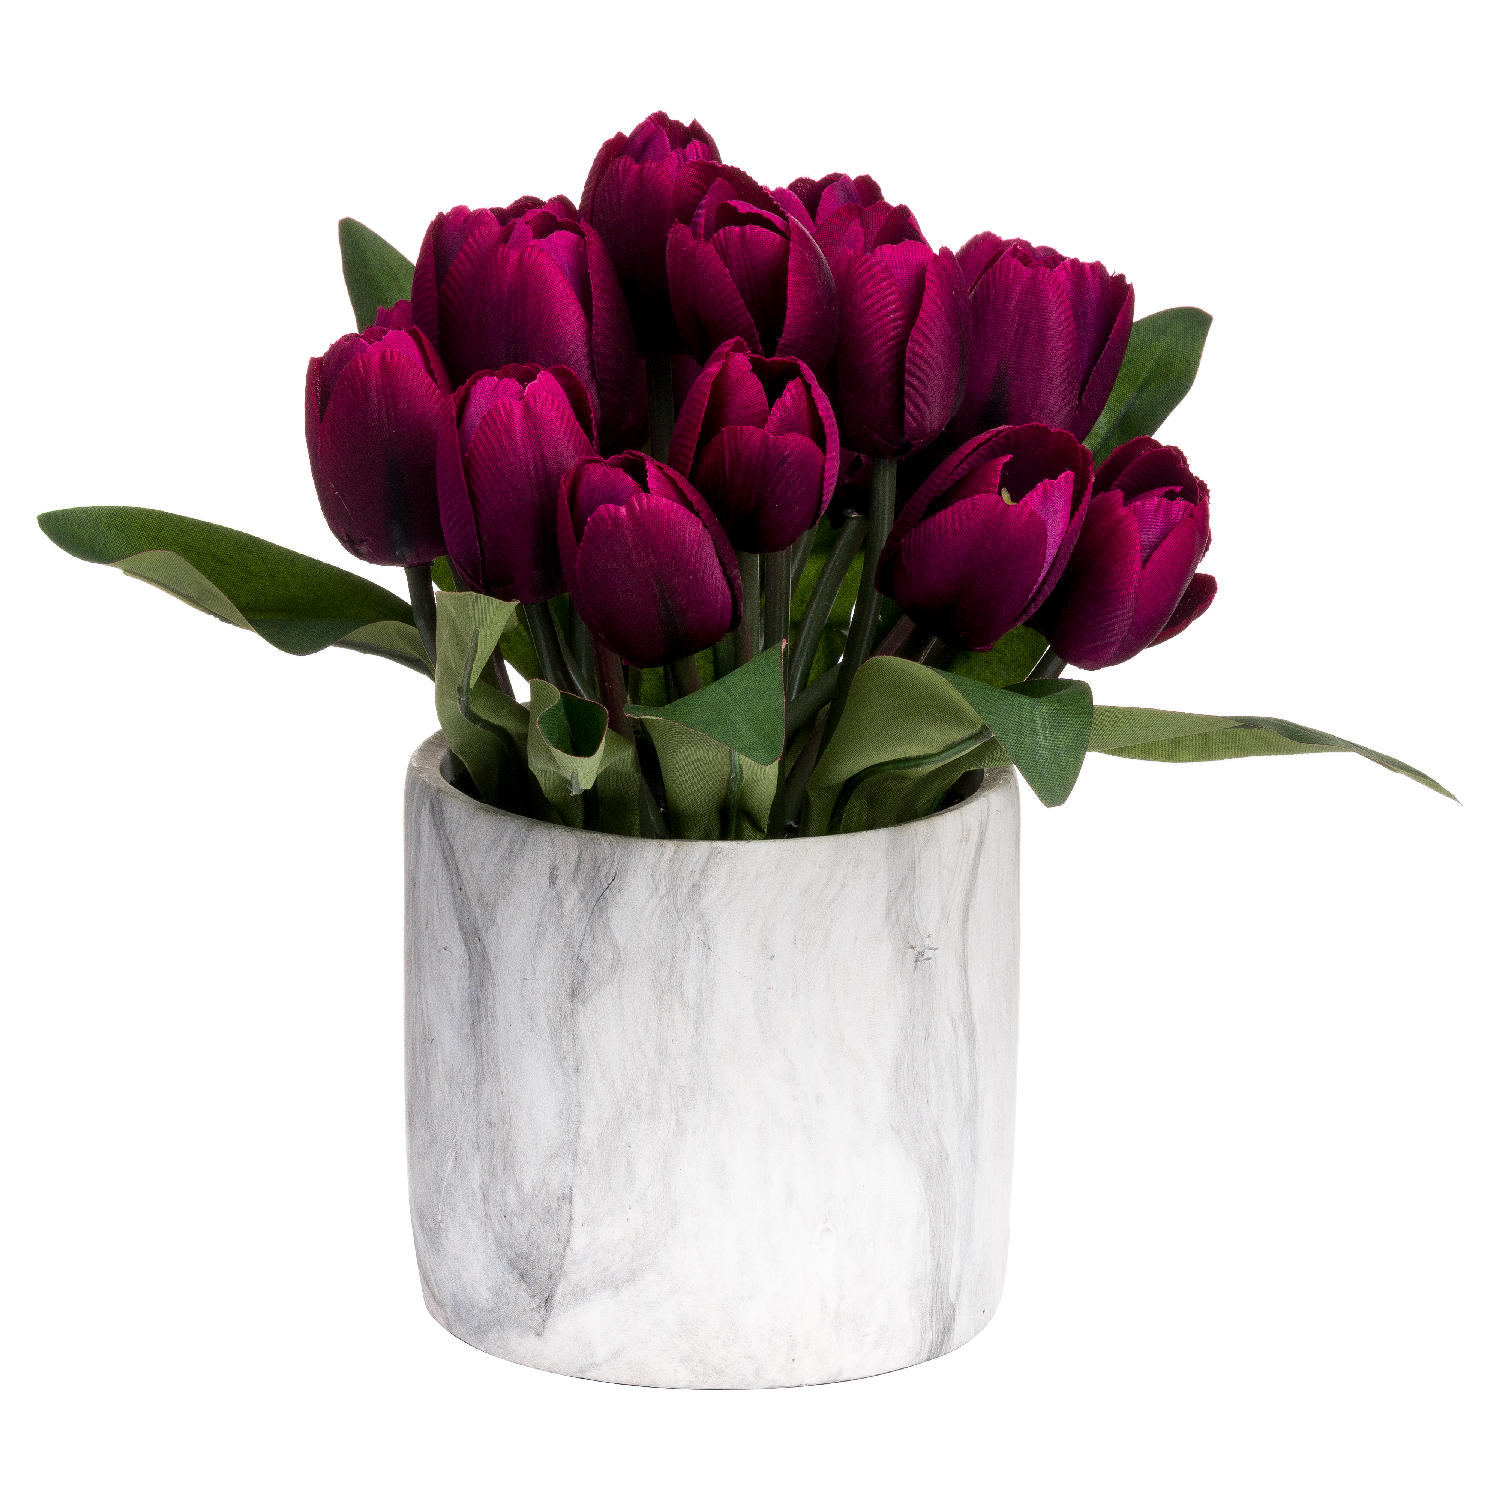 Purple Tulips In Marble Pot - Image 1